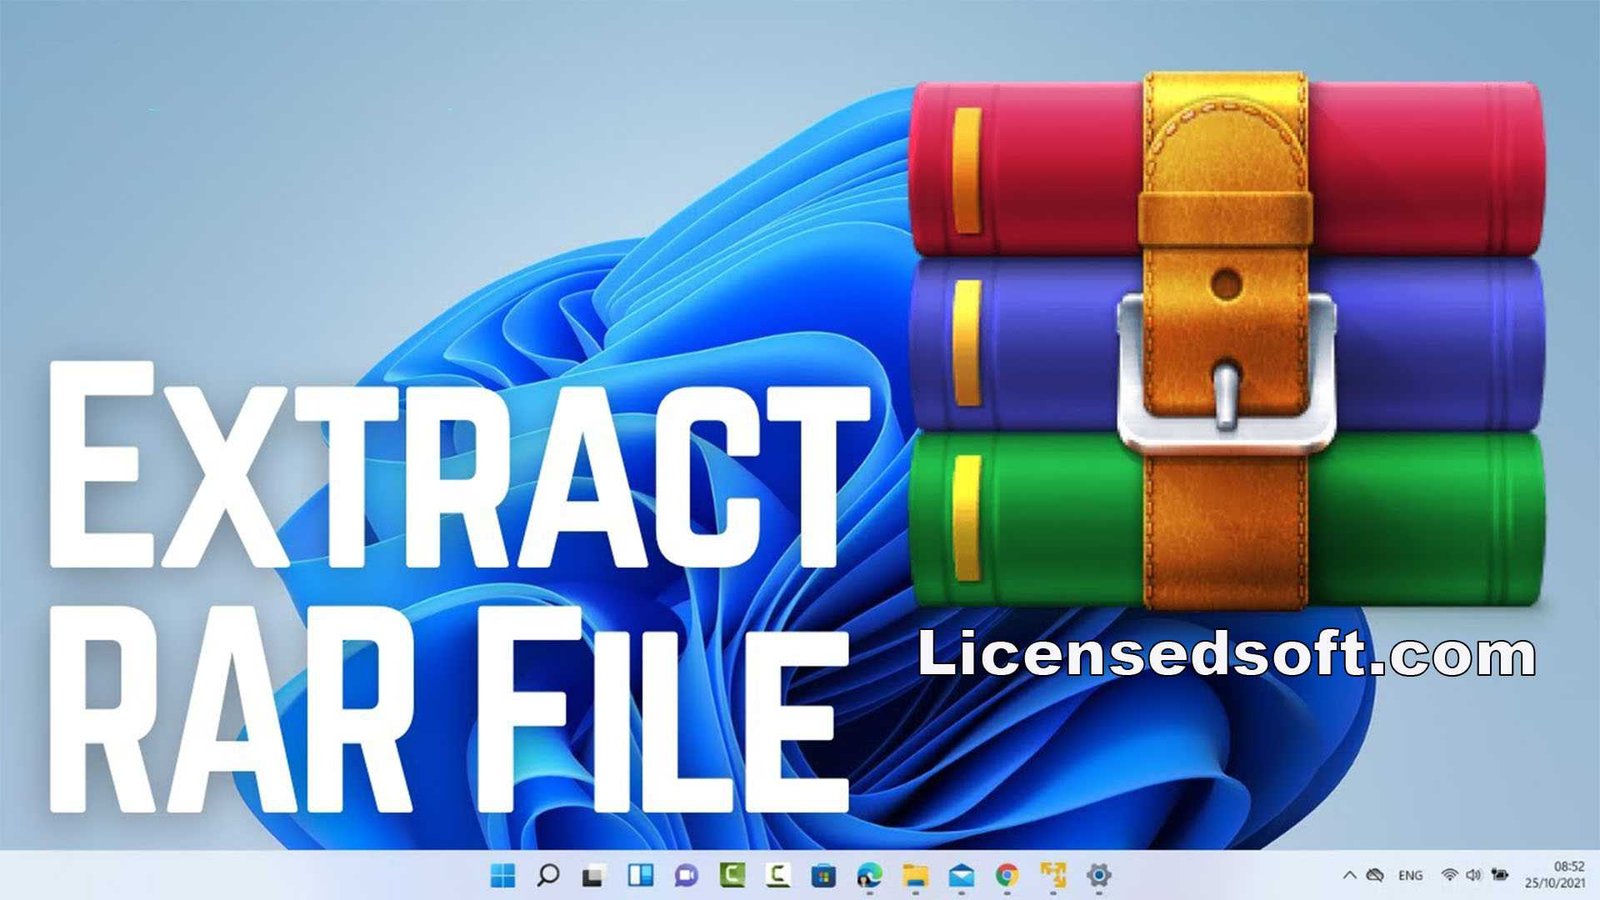 RAR Extractor Max - Unzip File 12.2 For Mac Lifetime Premiumcover bphoto by licensedsoft.